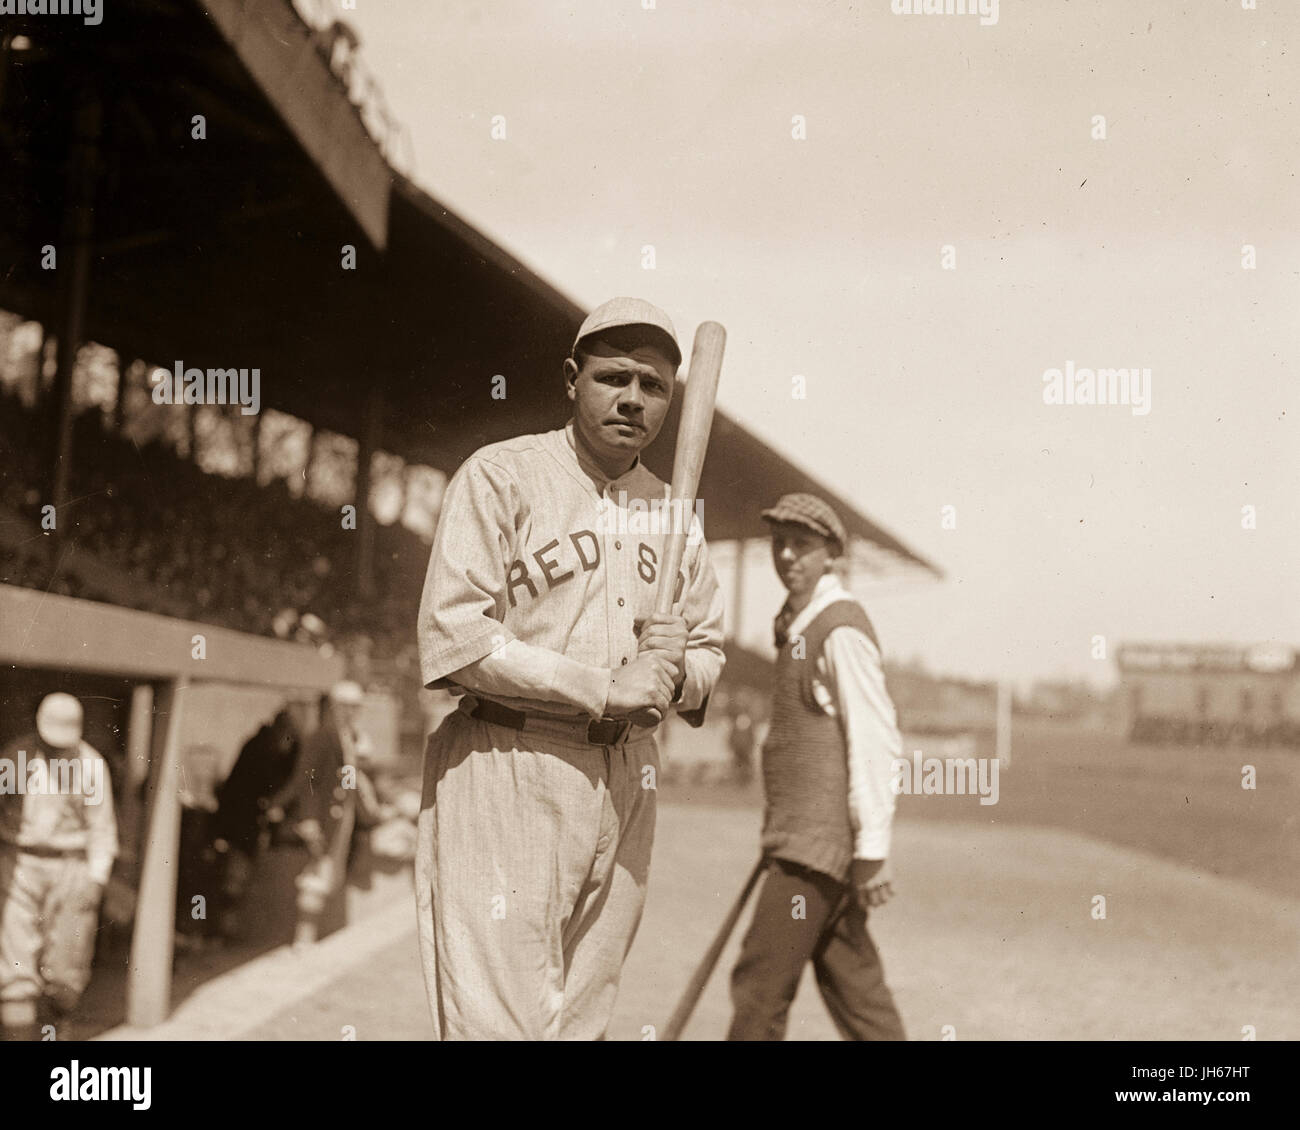 Babe Ruth takes the field while playing for the Boston Red Sox in 1919. George Herman 'Babe' Ruth Jr. (February 6, 1895 – August 16, 1948) was an American professional baseball player whose career in Major League Baseball (MLB) spanned 22 seasons, from 1914 through 1935. Nicknamed 'The Bambino' and 'The Sultan of Swat', he began his MLB career as a stellar left-handed pitcher for the Boston Red Sox, but achieved his greatest fame as a slugging outfielder for the New York Yankees. Ruth established many MLB batting (and some pitching) records. Stock Photo